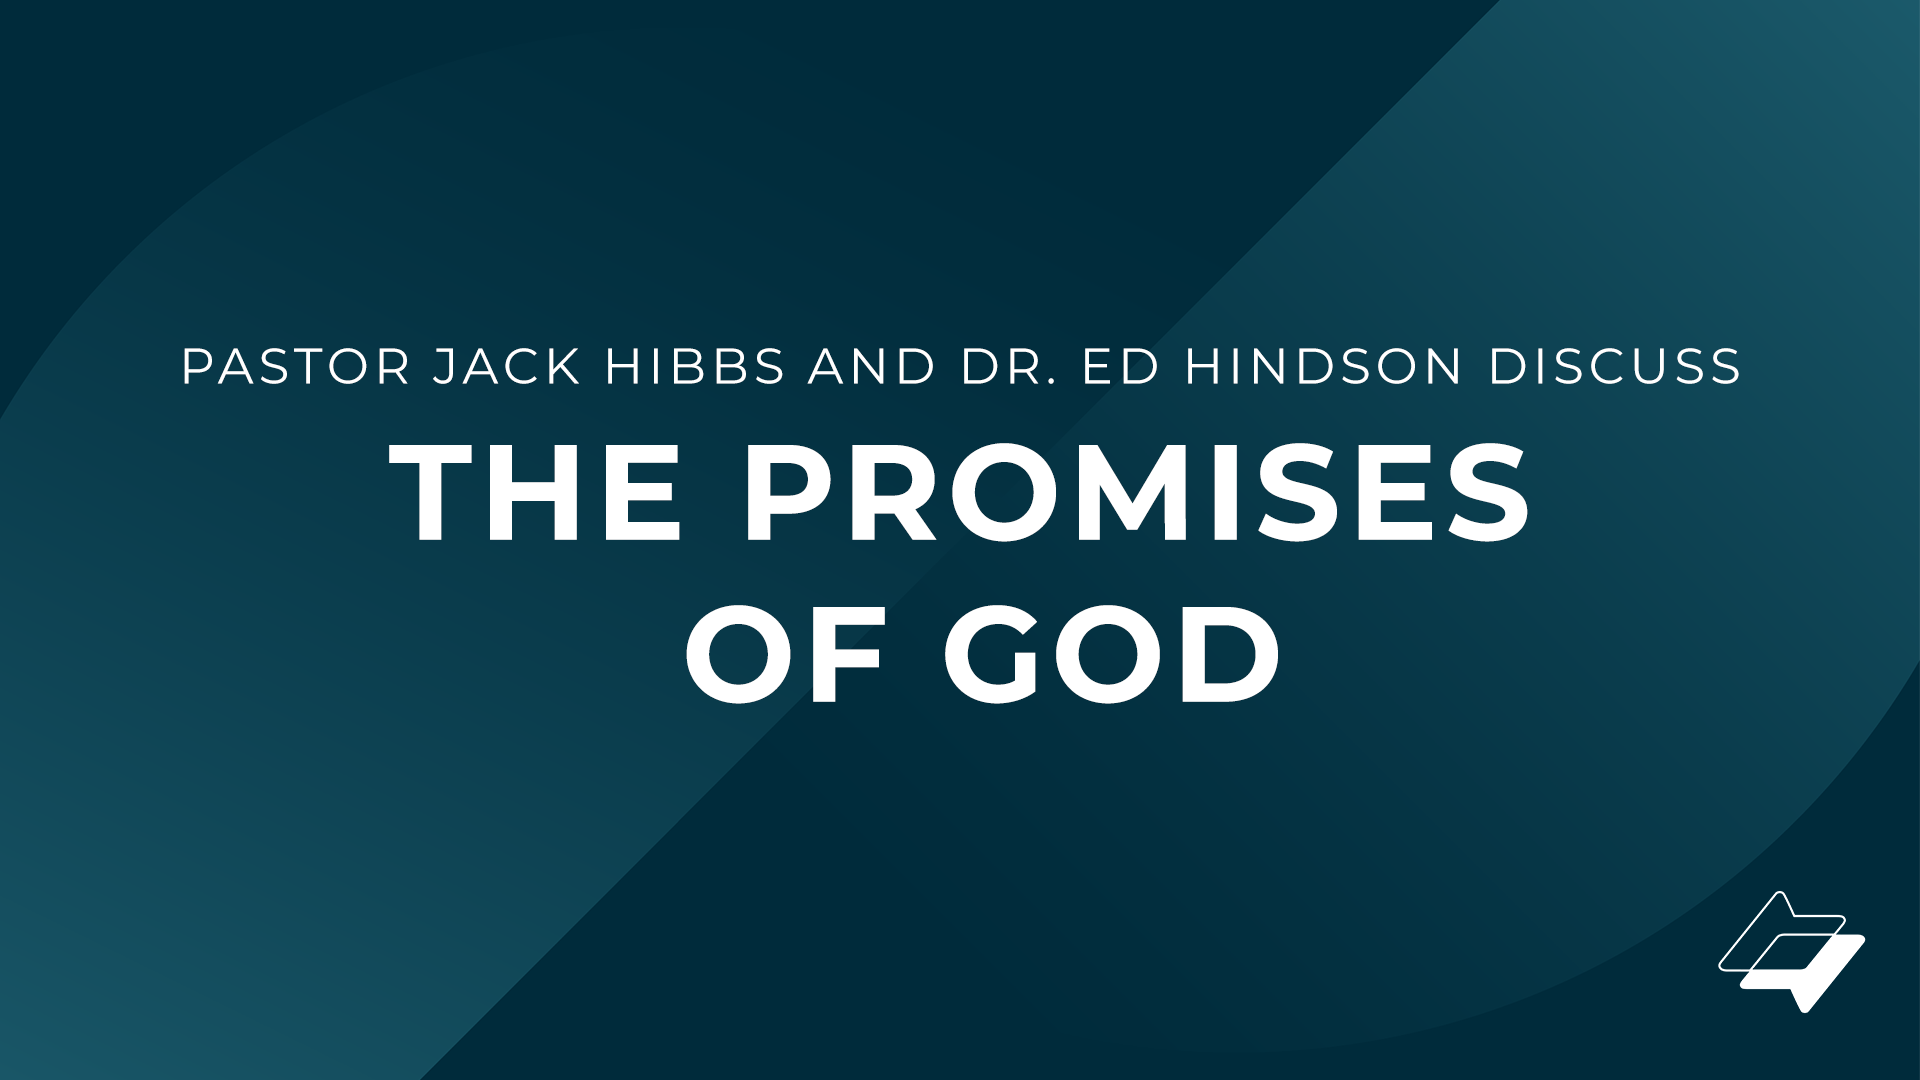 Pastor Jack Hibbs and Dr. Ed Hindson Discuss the Promises of God